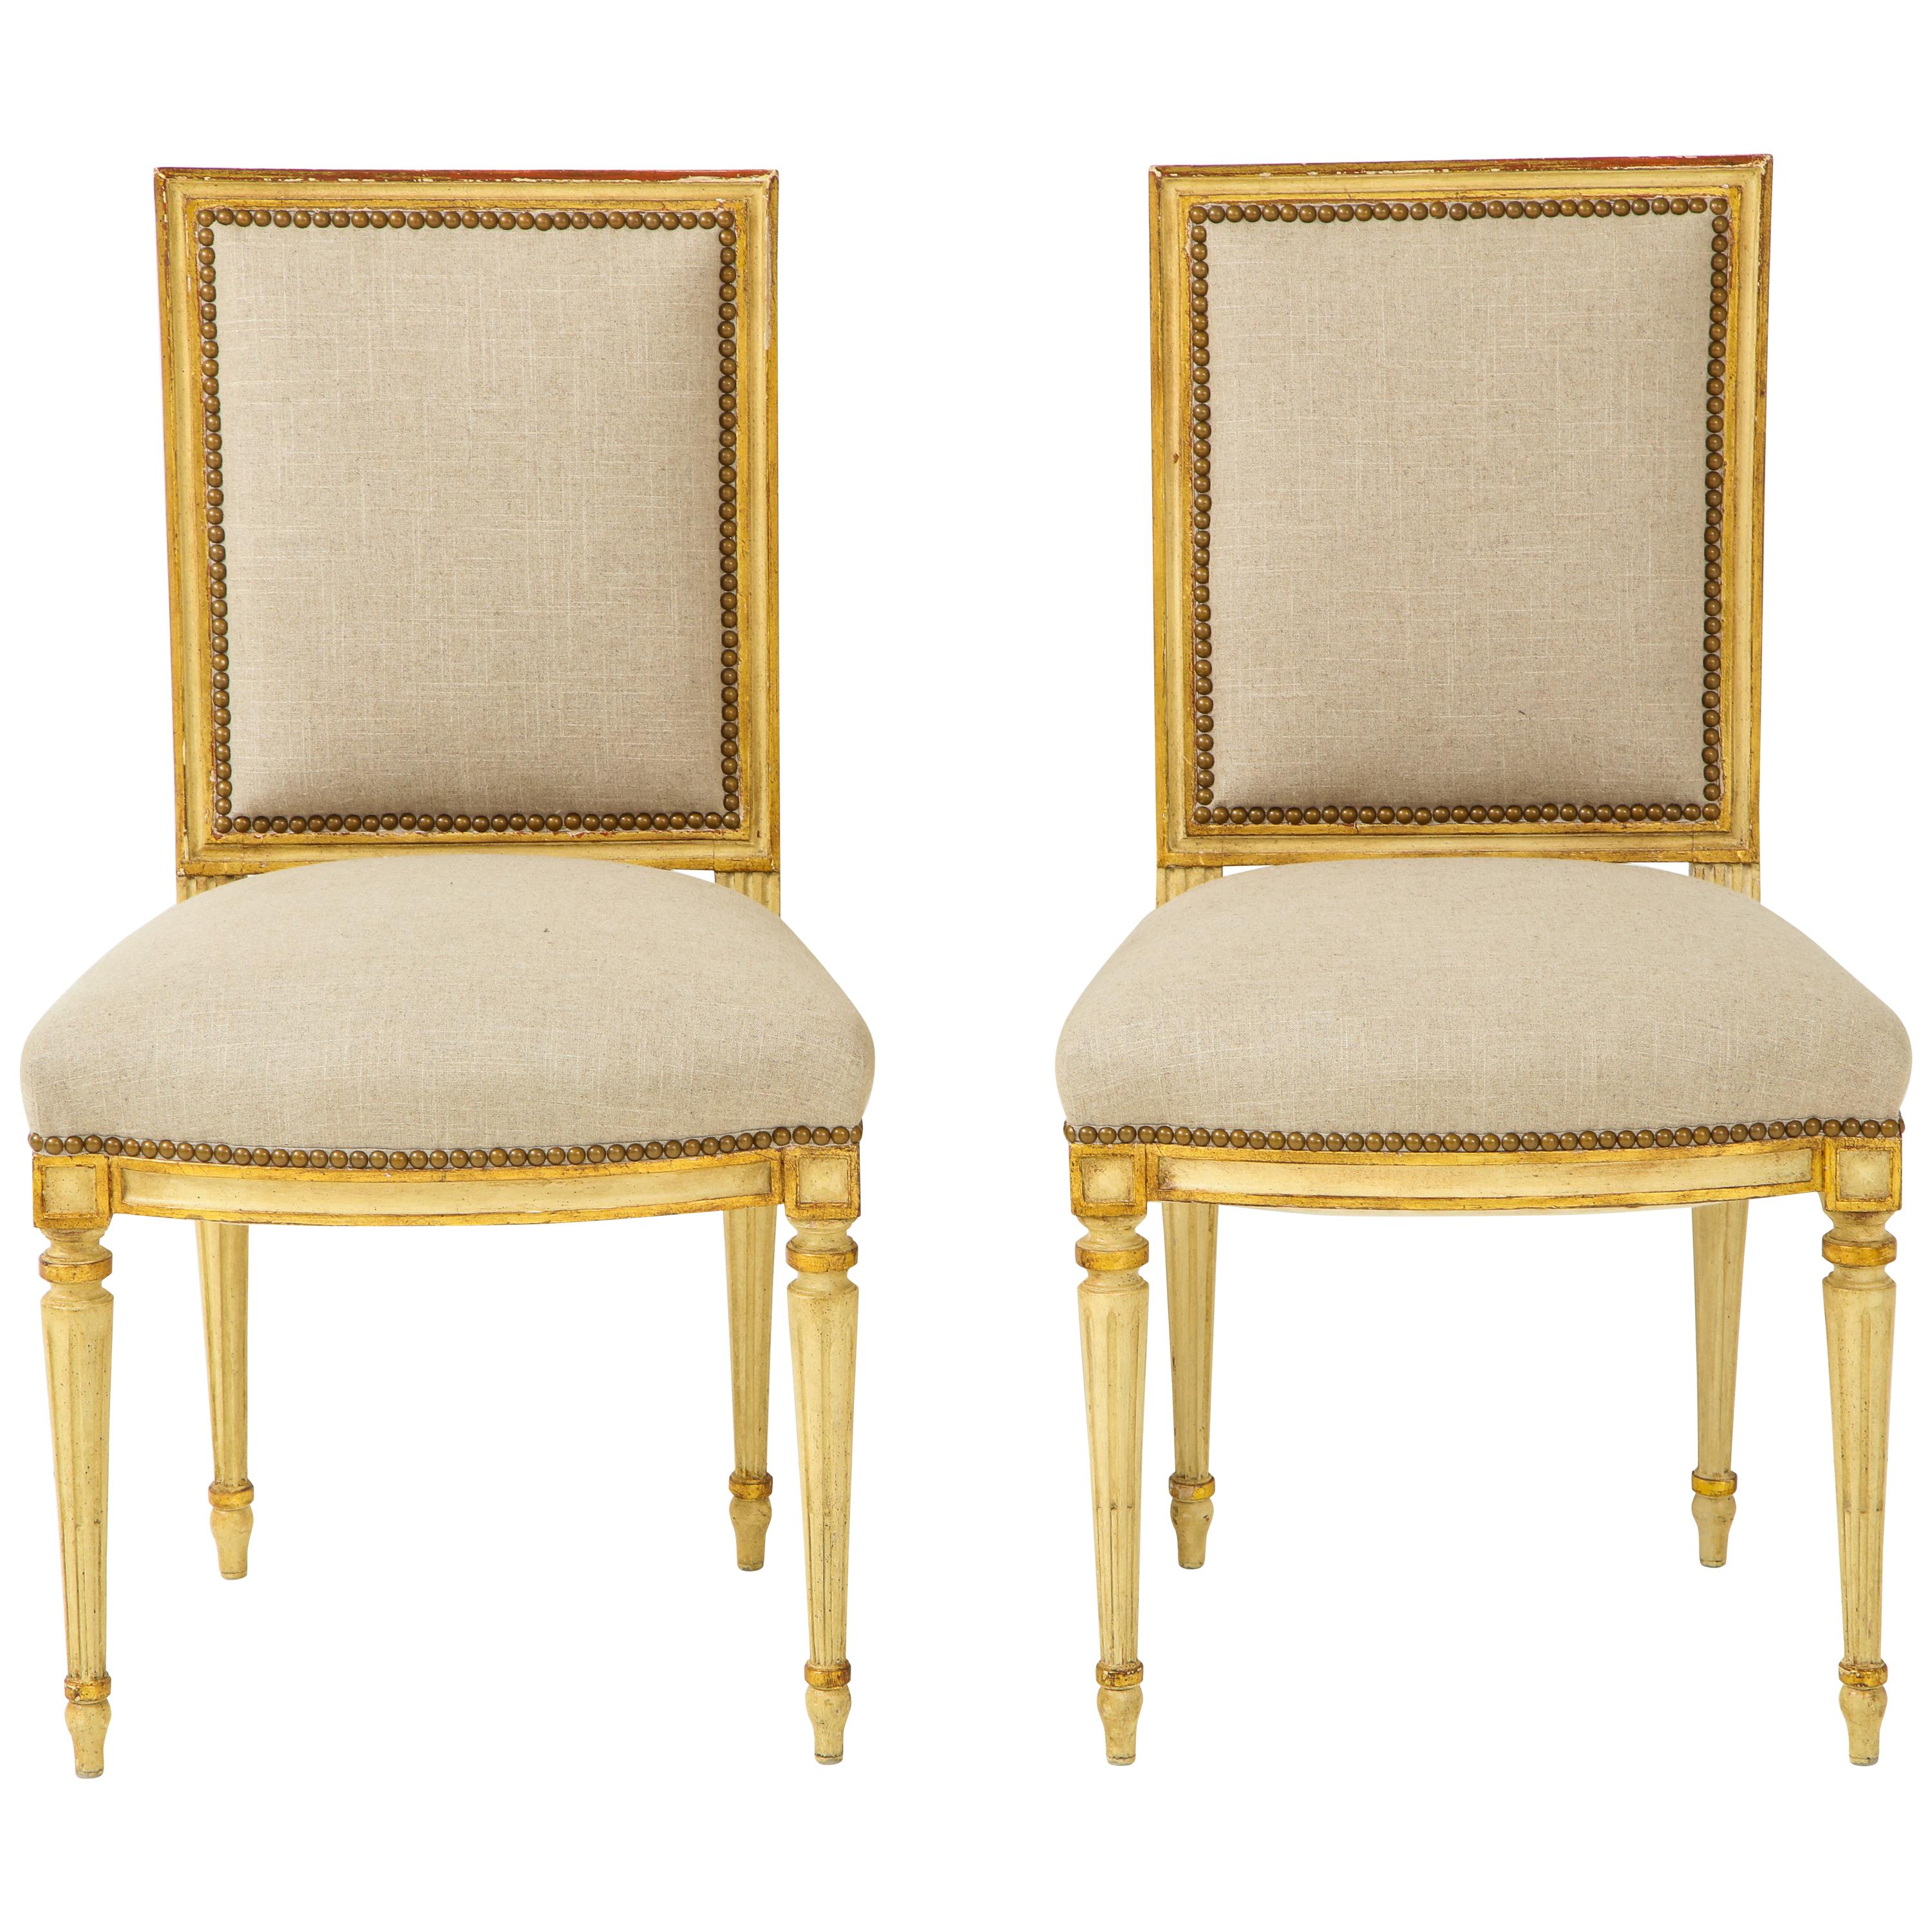 Pair of Upholstered Louis XVI Side Chairs